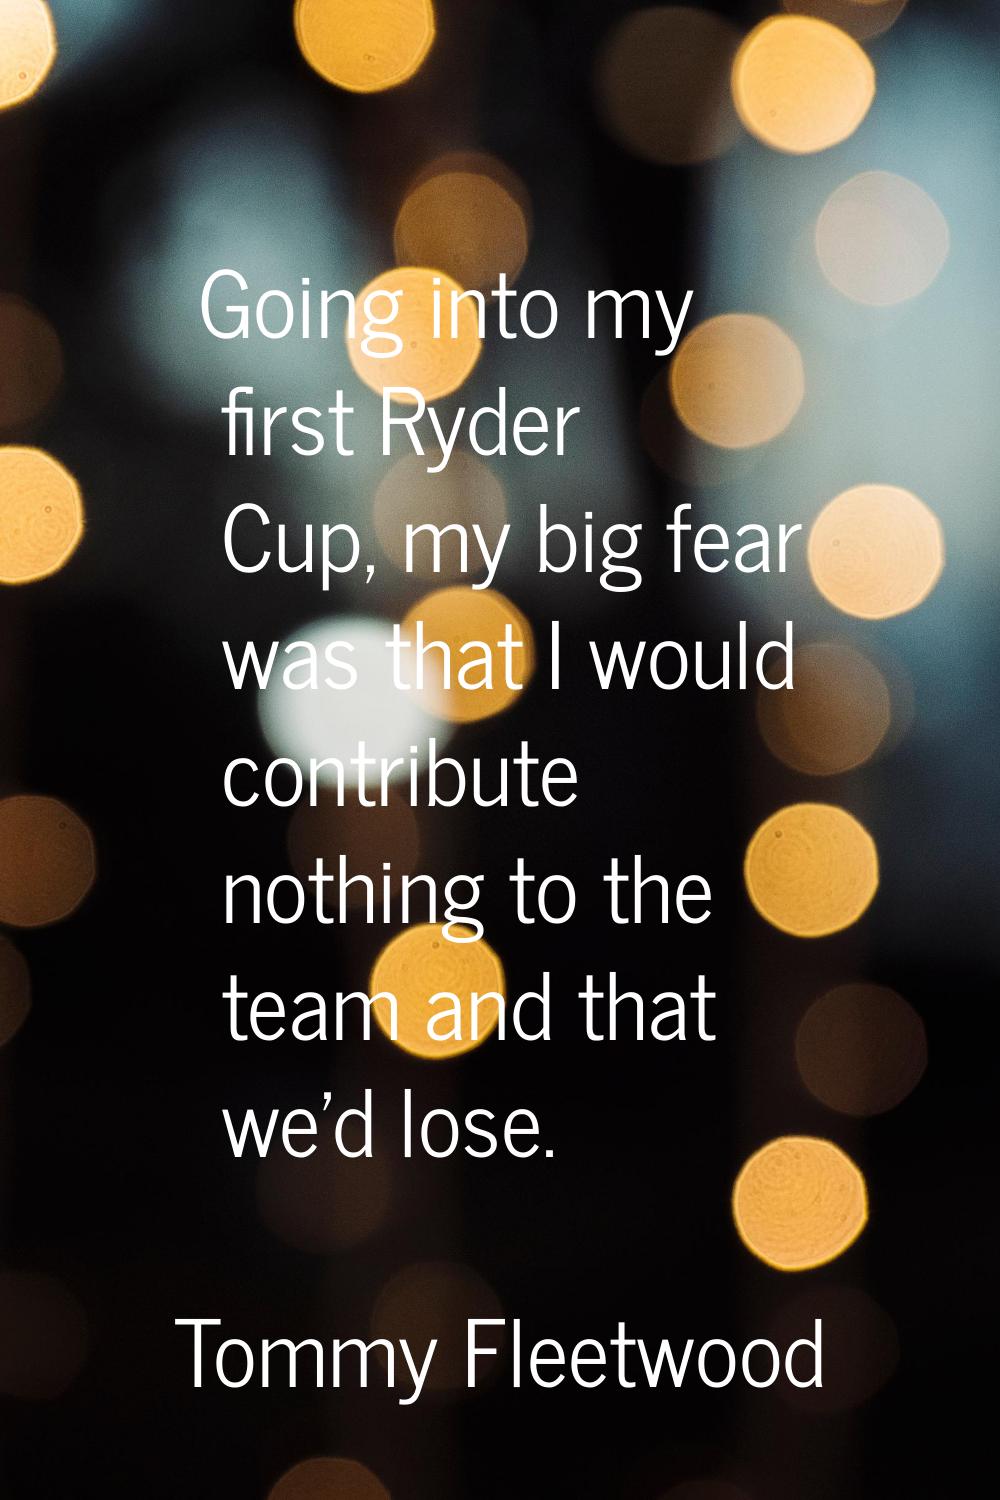 Going into my first Ryder Cup, my big fear was that I would contribute nothing to the team and that